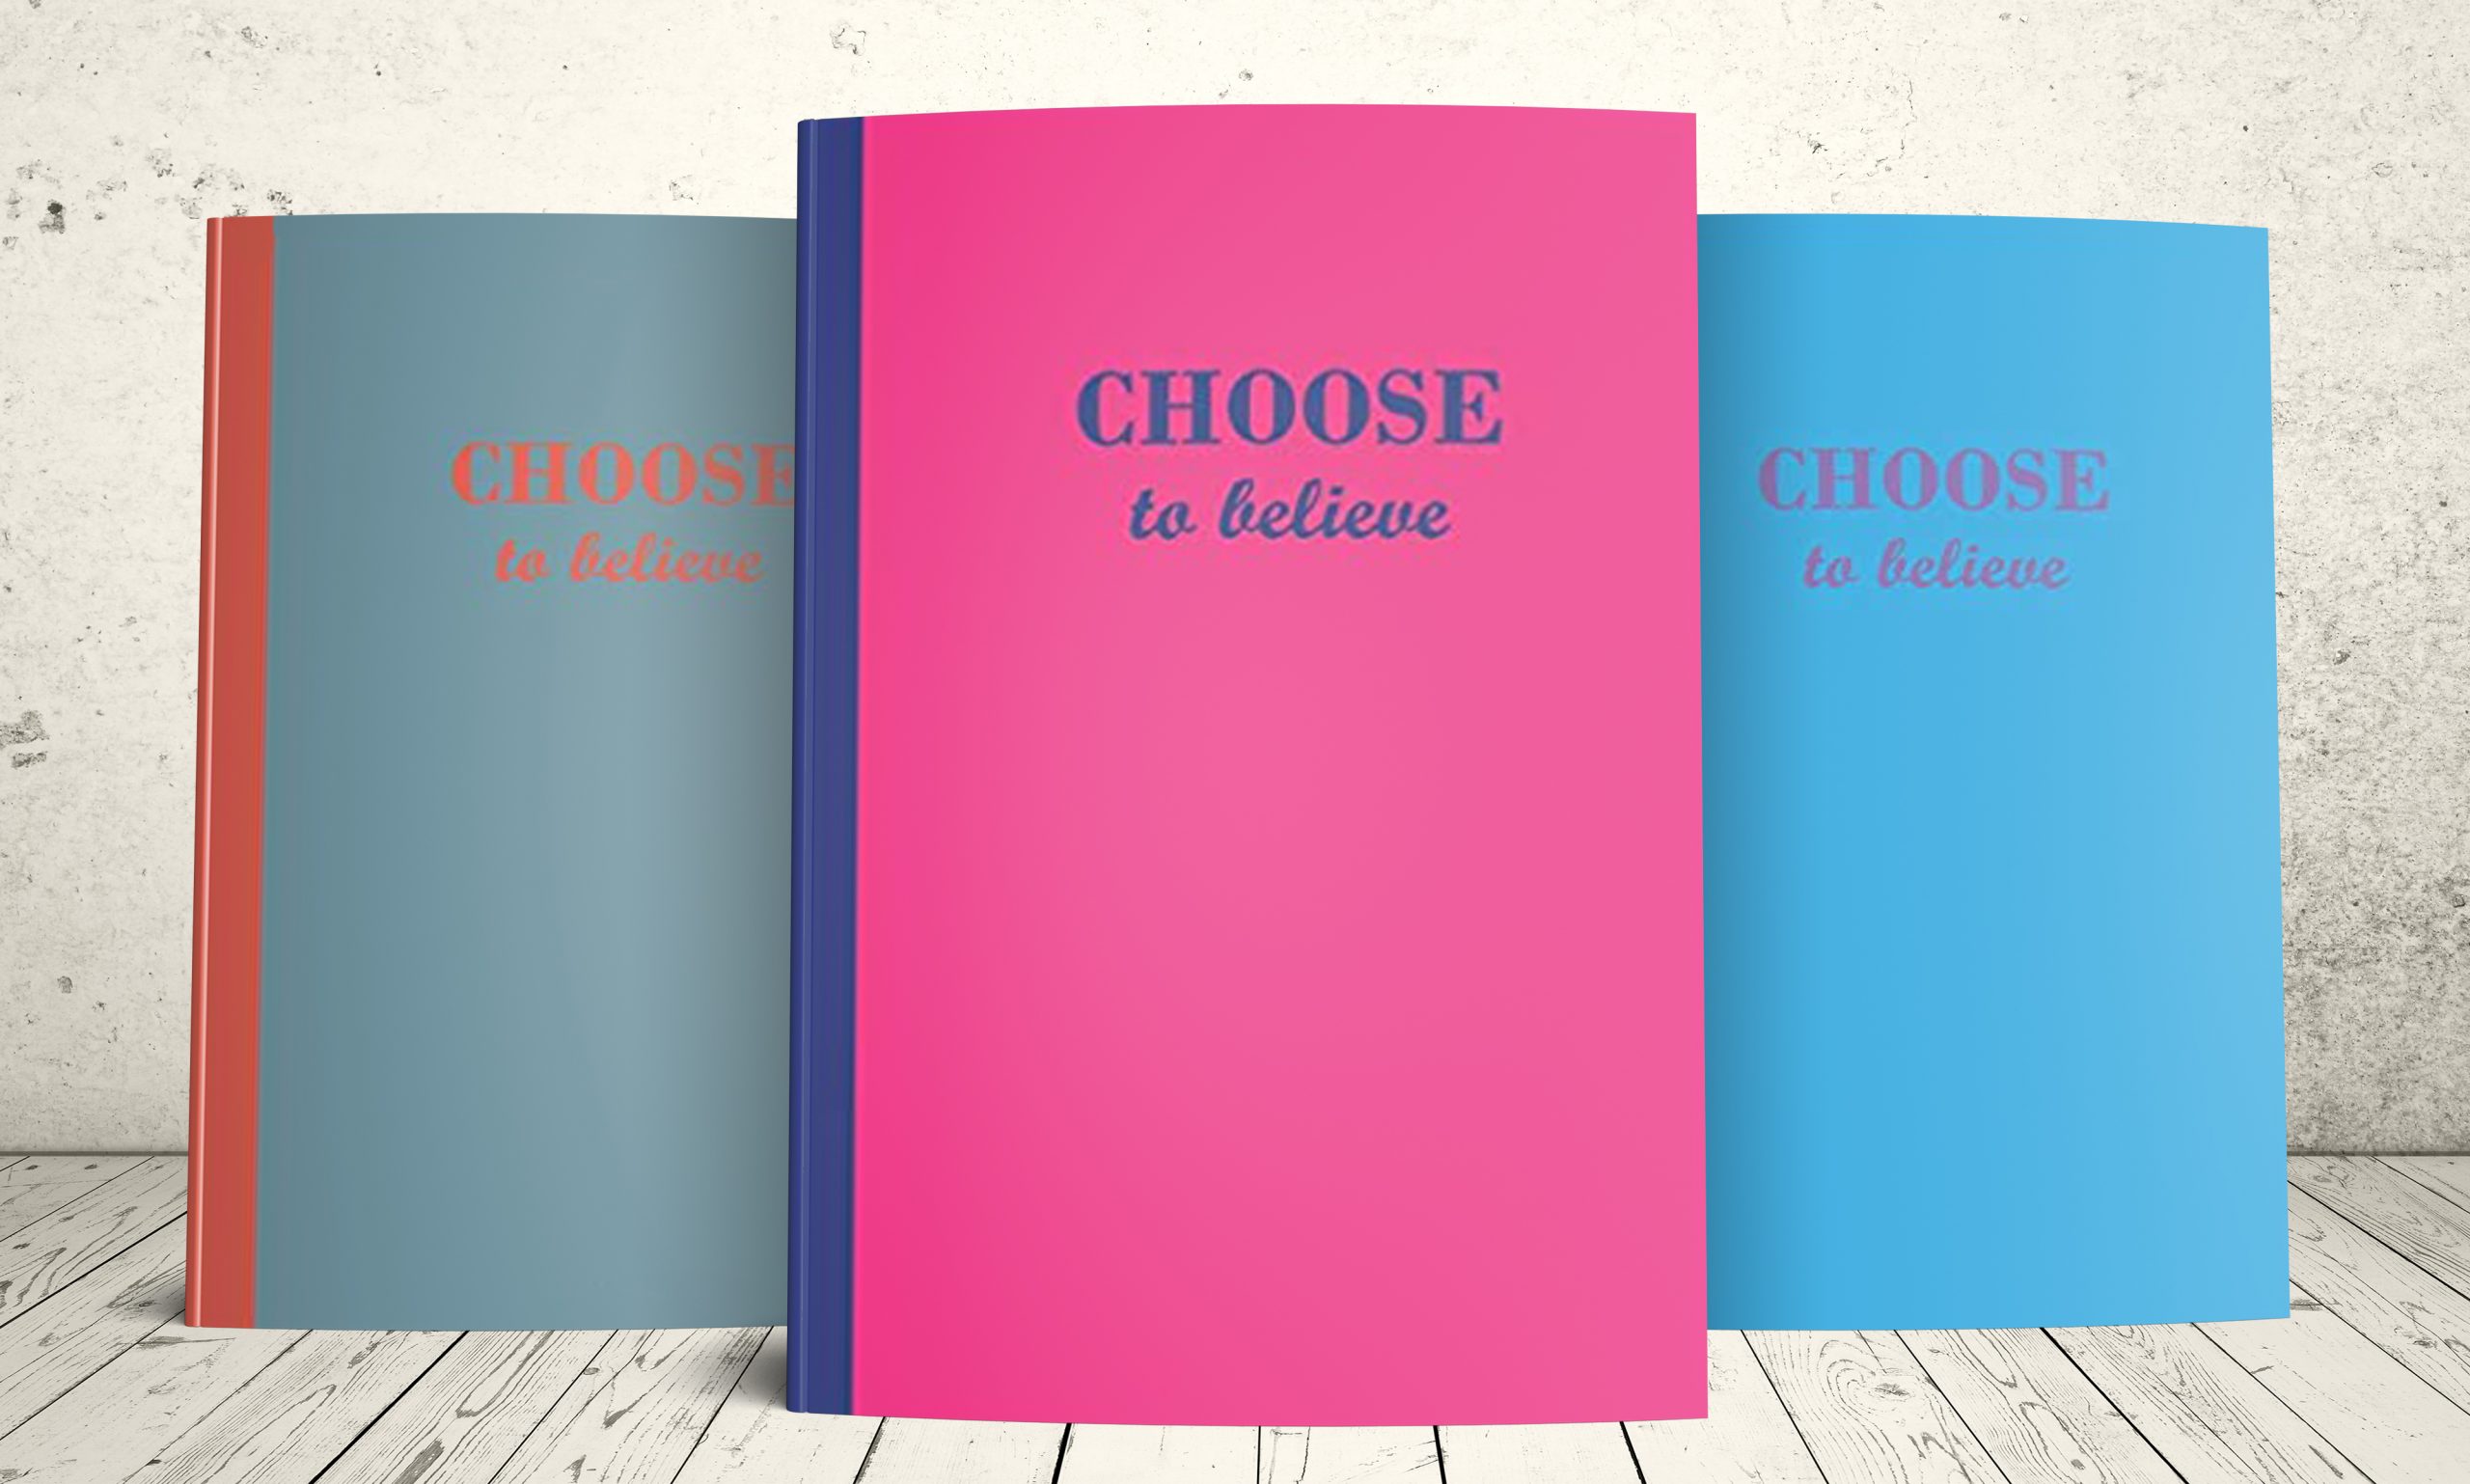 Three journals with the motivational phrase Choose to believe on the cover: blue cover with orange text, pink cover with blue text, blue cover with purple text.